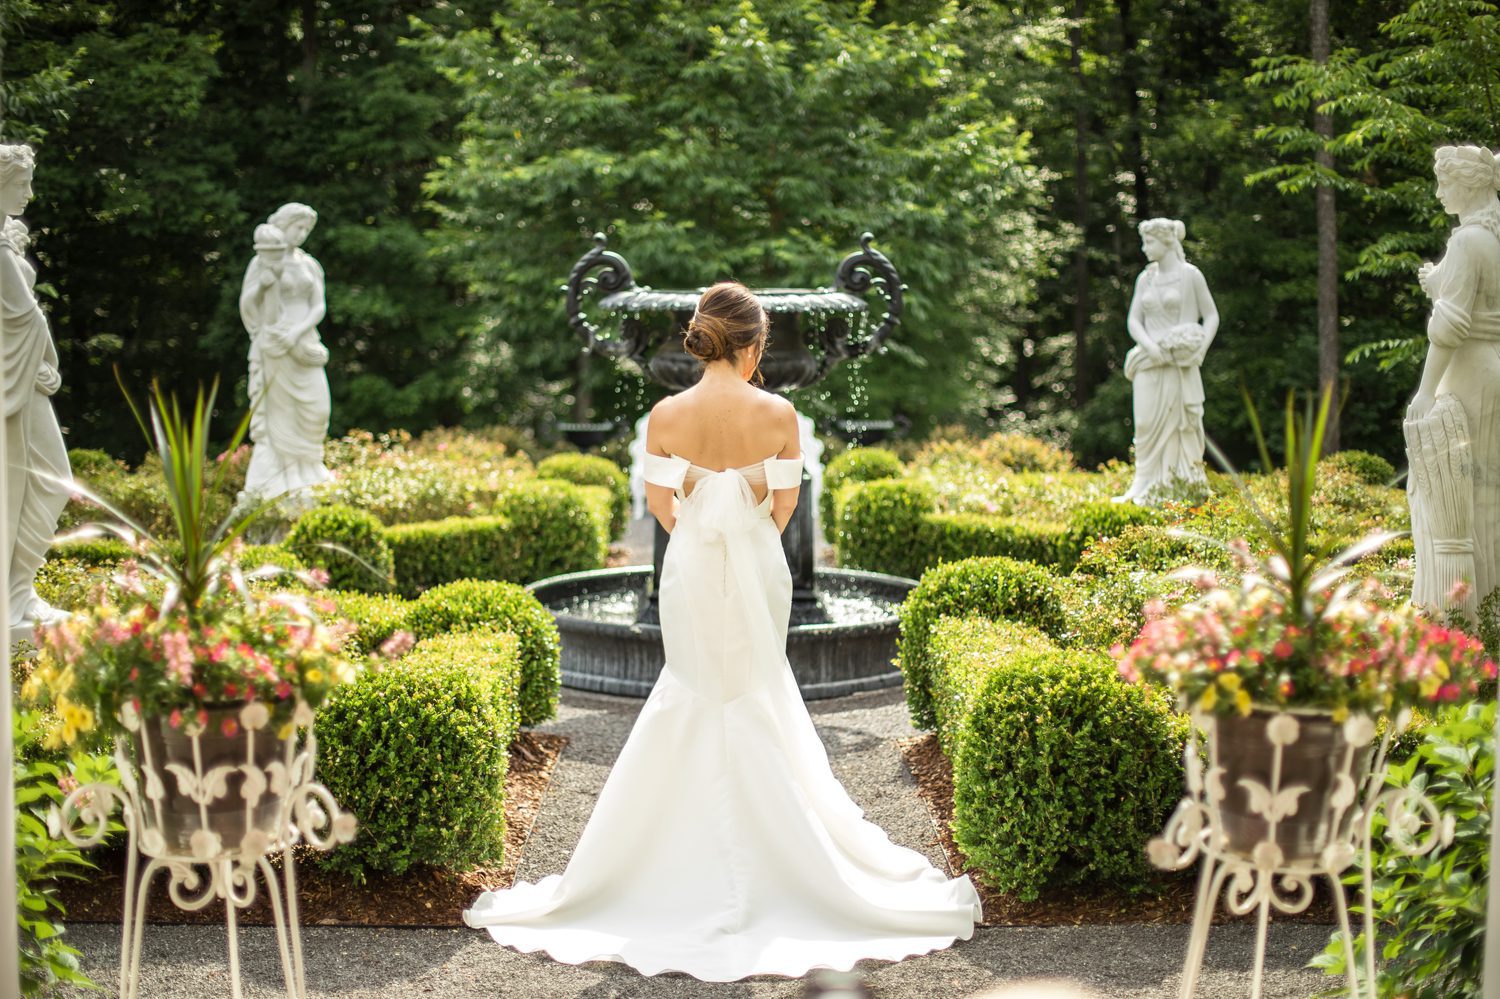 Private Estate Wedding Franklin, TN Bridal Portrait from Back in Garden with Statues